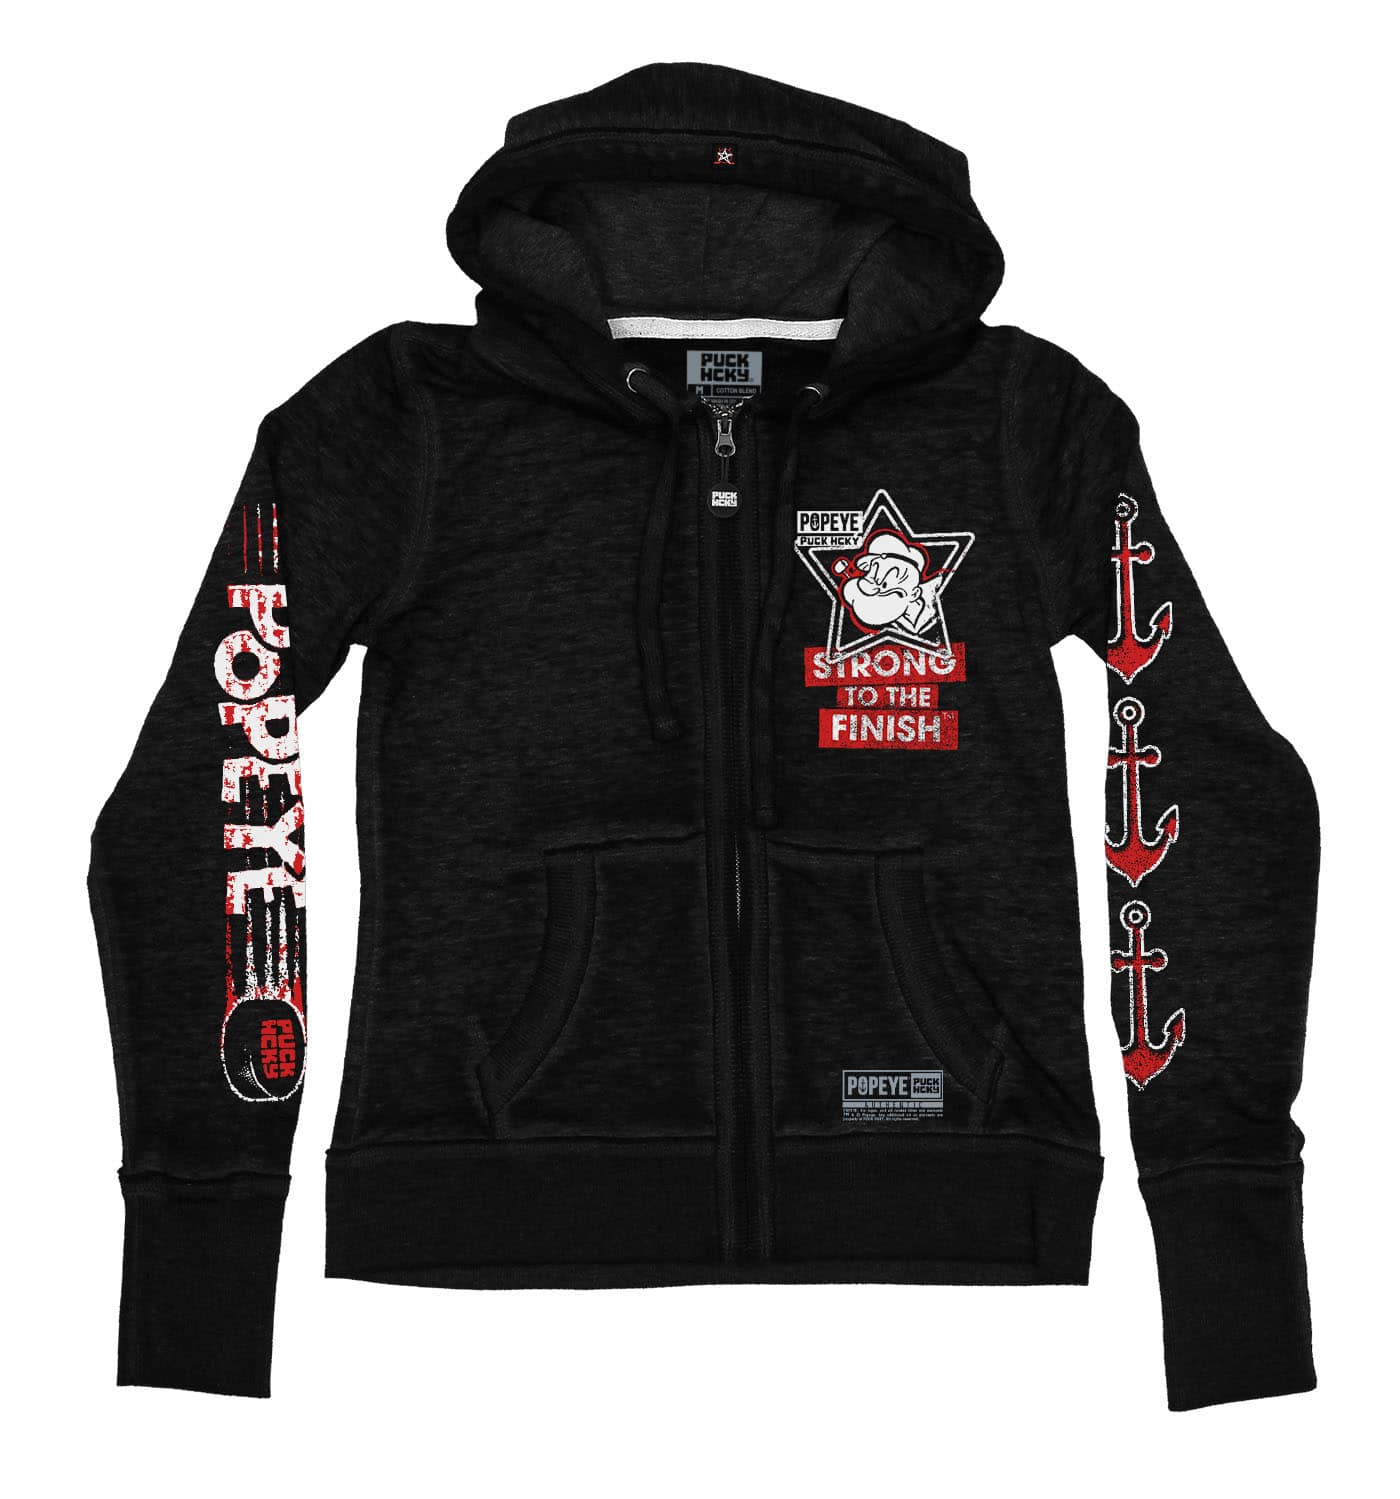 POPEYE 'STRONG TO THE FINISH' women's full zip hockey hoodie in acid black front view